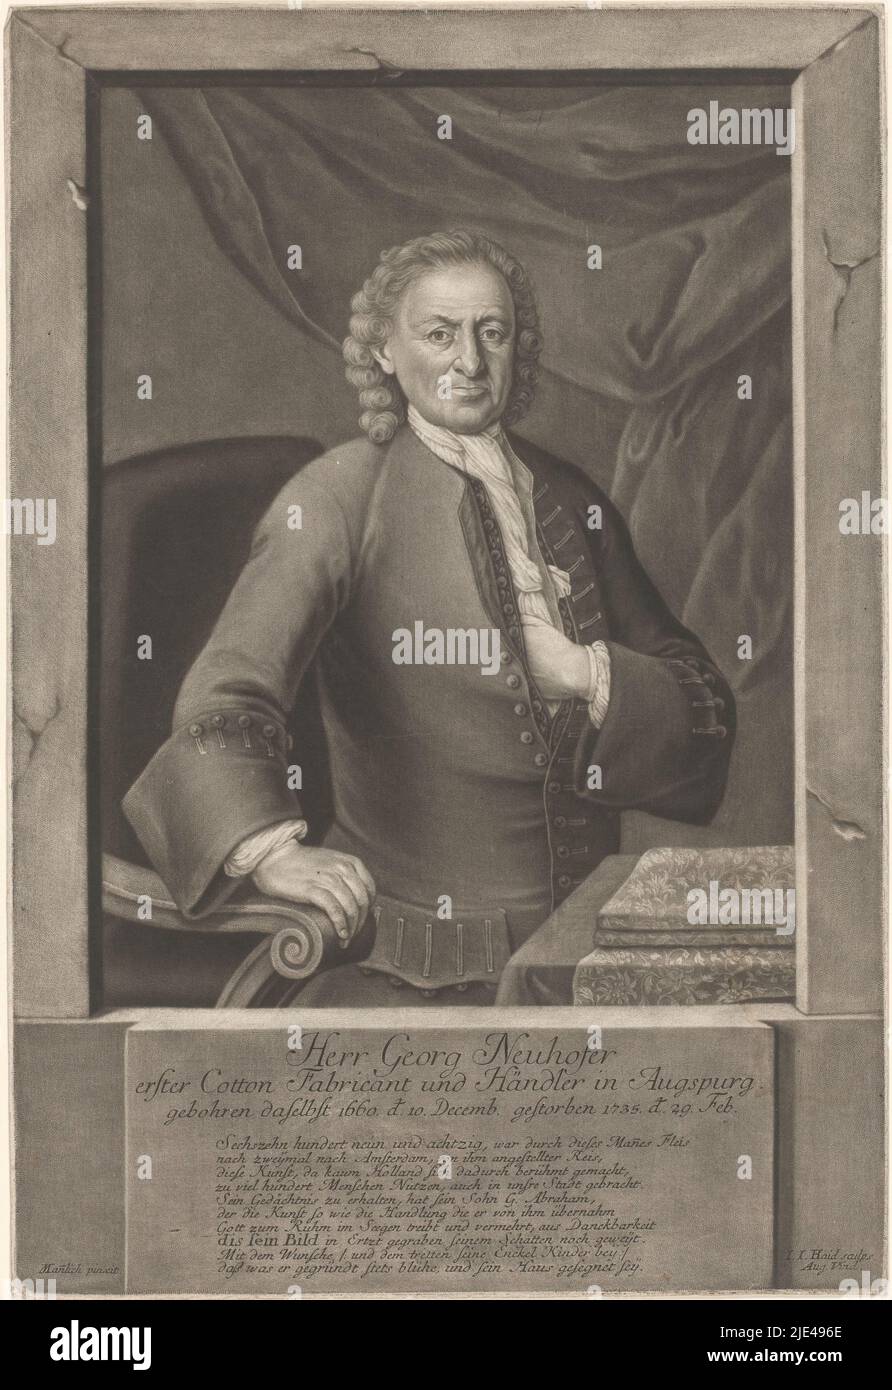 Portrait of Georg Neuhofer, Johann Jacob Haid, after Mannlich, 1735 - 1767, With poem of praise in German., print maker: Johann Jacob Haid, (mentioned on object), after: Mannlich, (mentioned on object), Augsburg, 1735 - 1767, paper, h 383 mm × w 259 mm Stock Photo